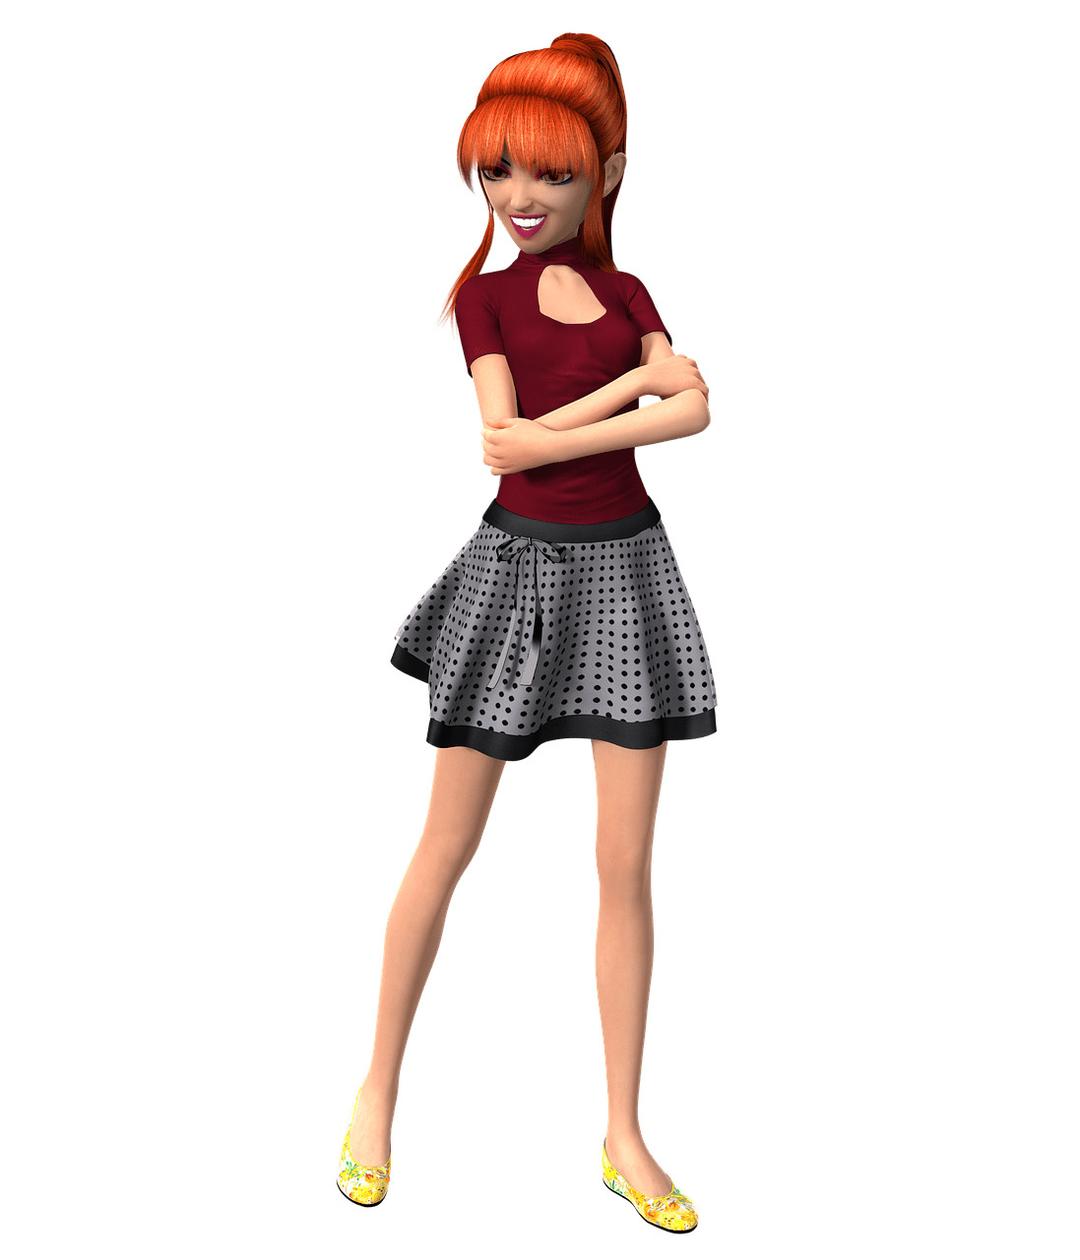 Woman Red Hair png transparent